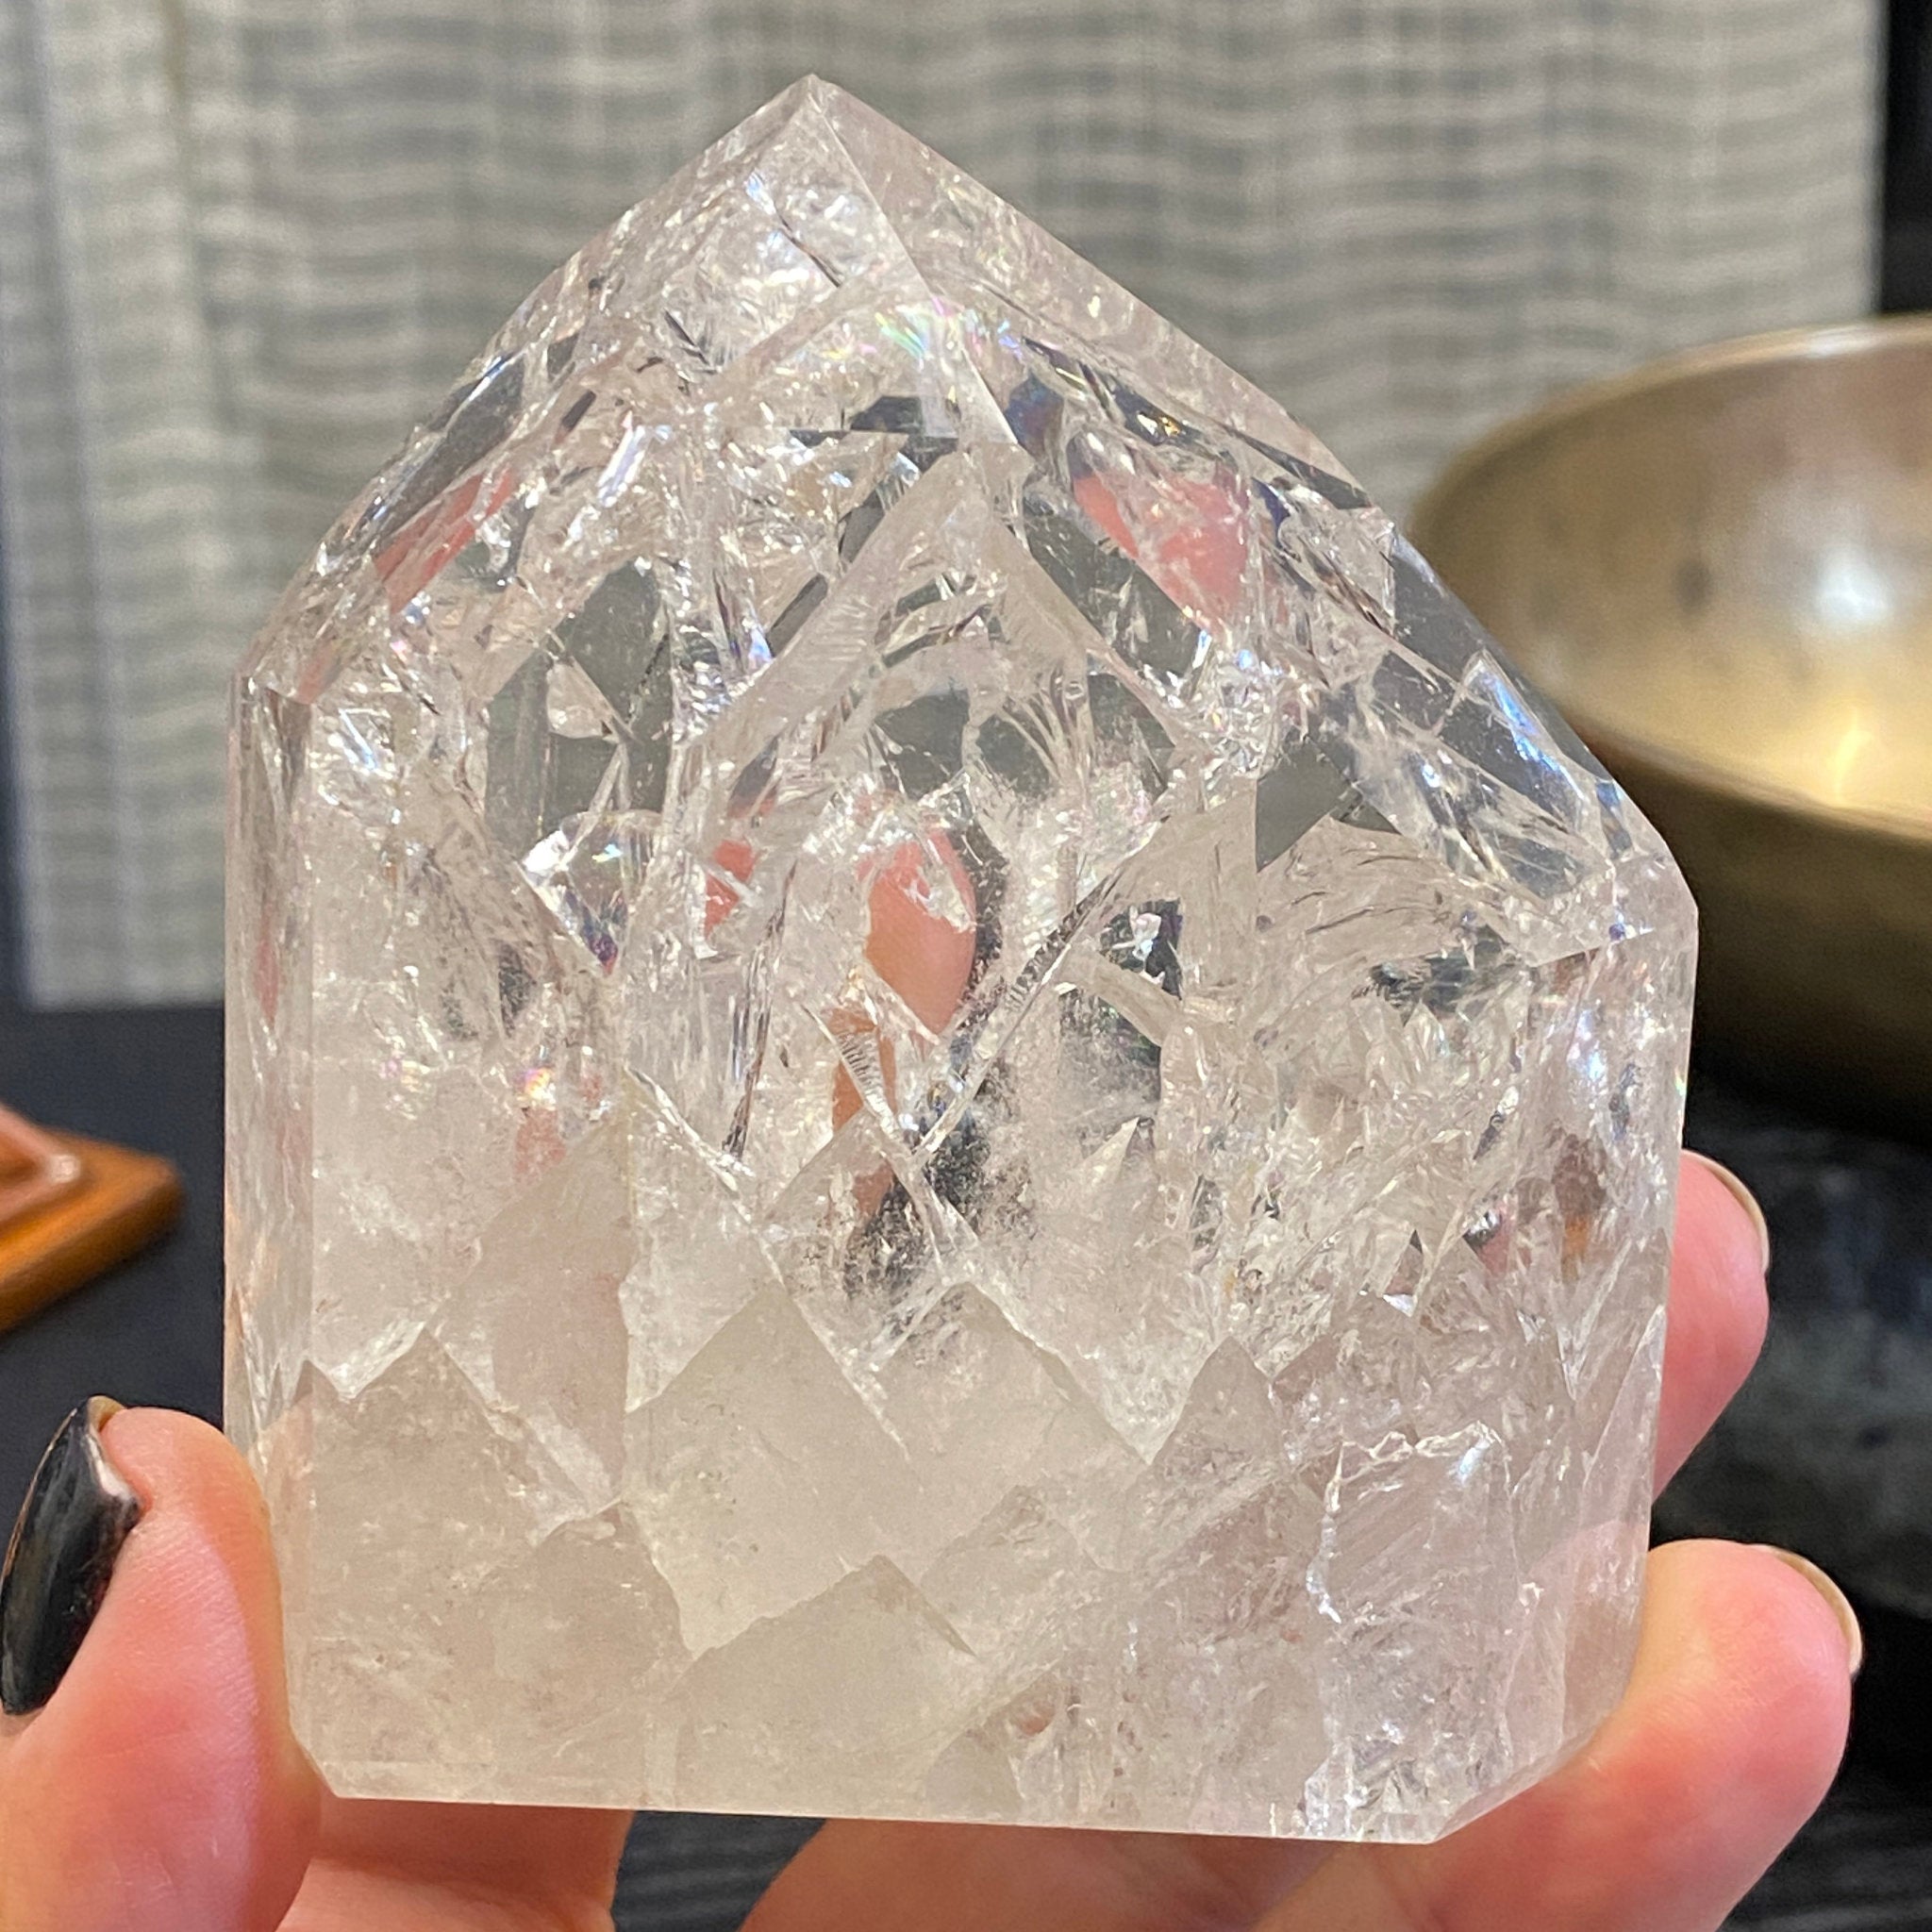 Fire and Ice Quartz stand up